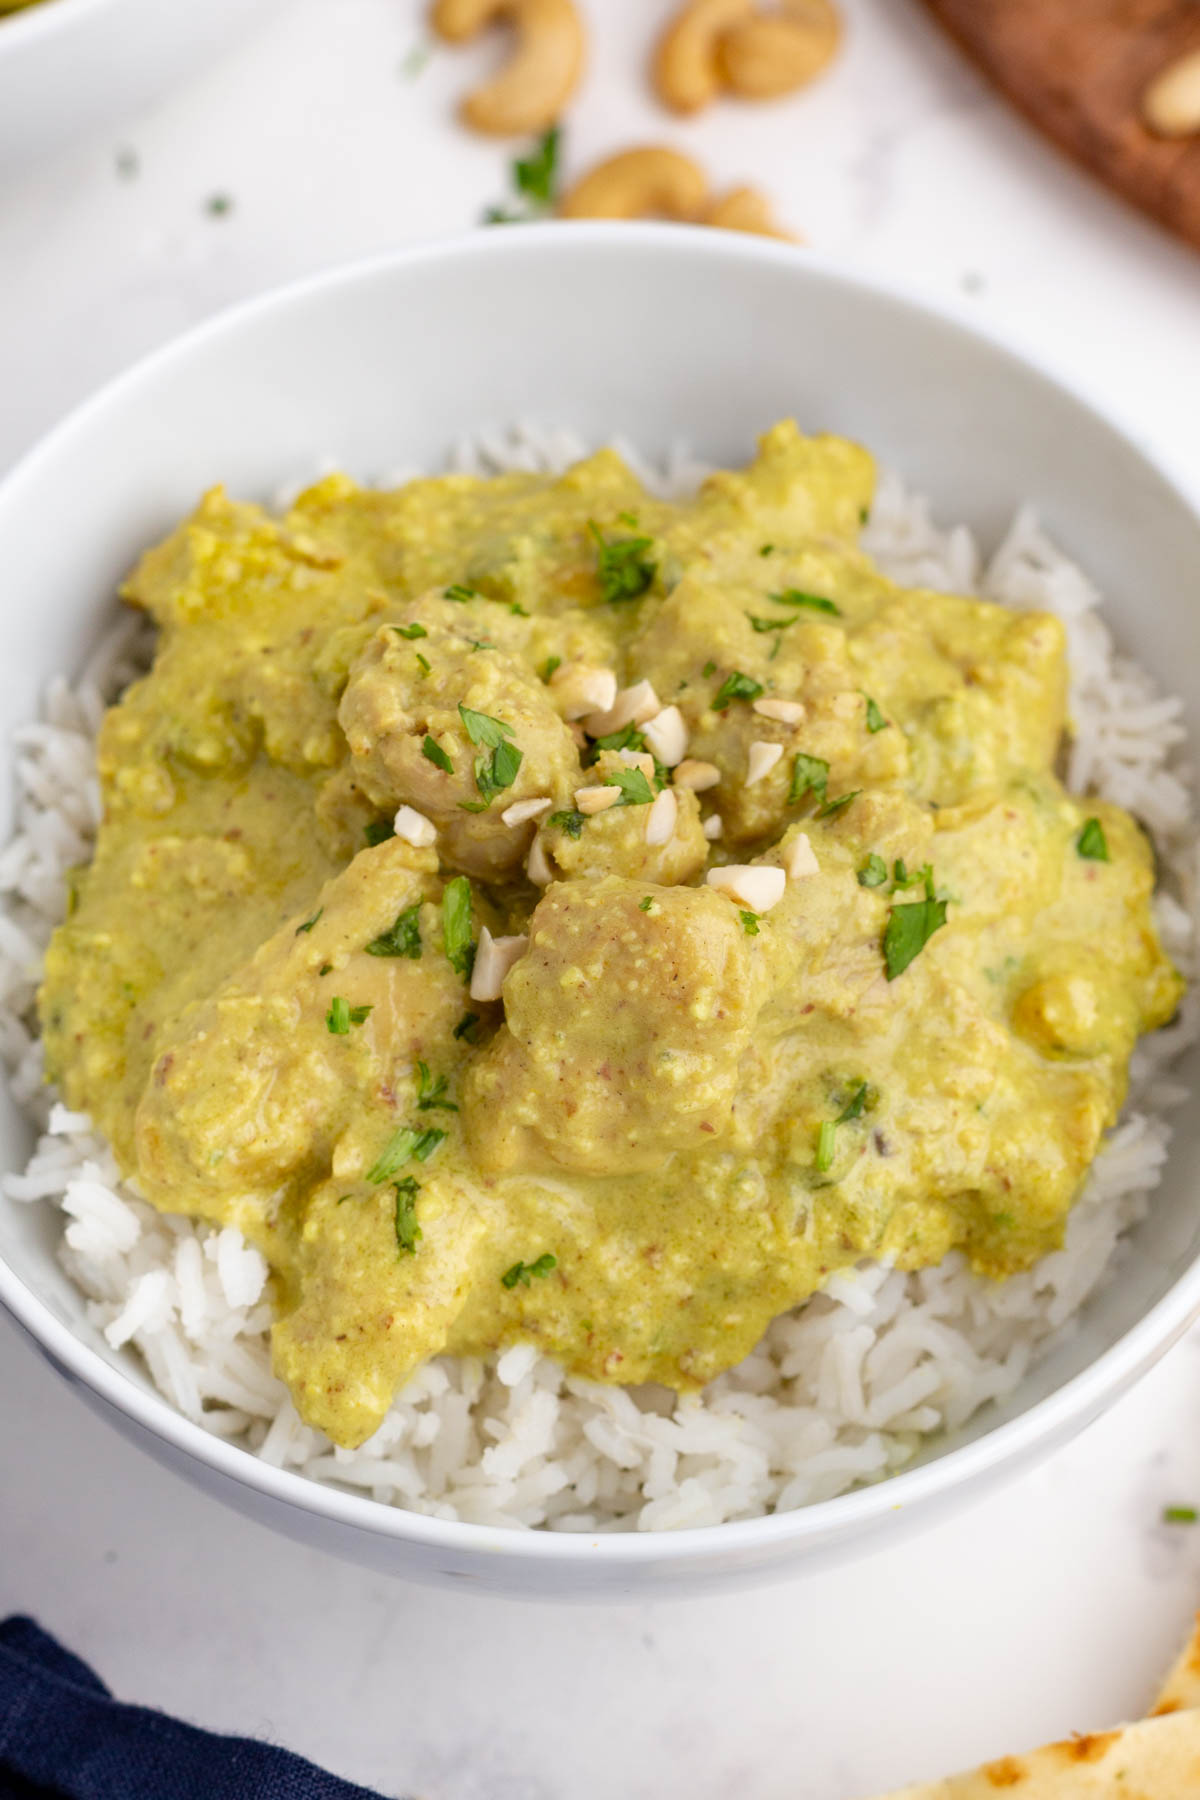 Full of Indian spices, chicken korma curry is a flavorful dish.